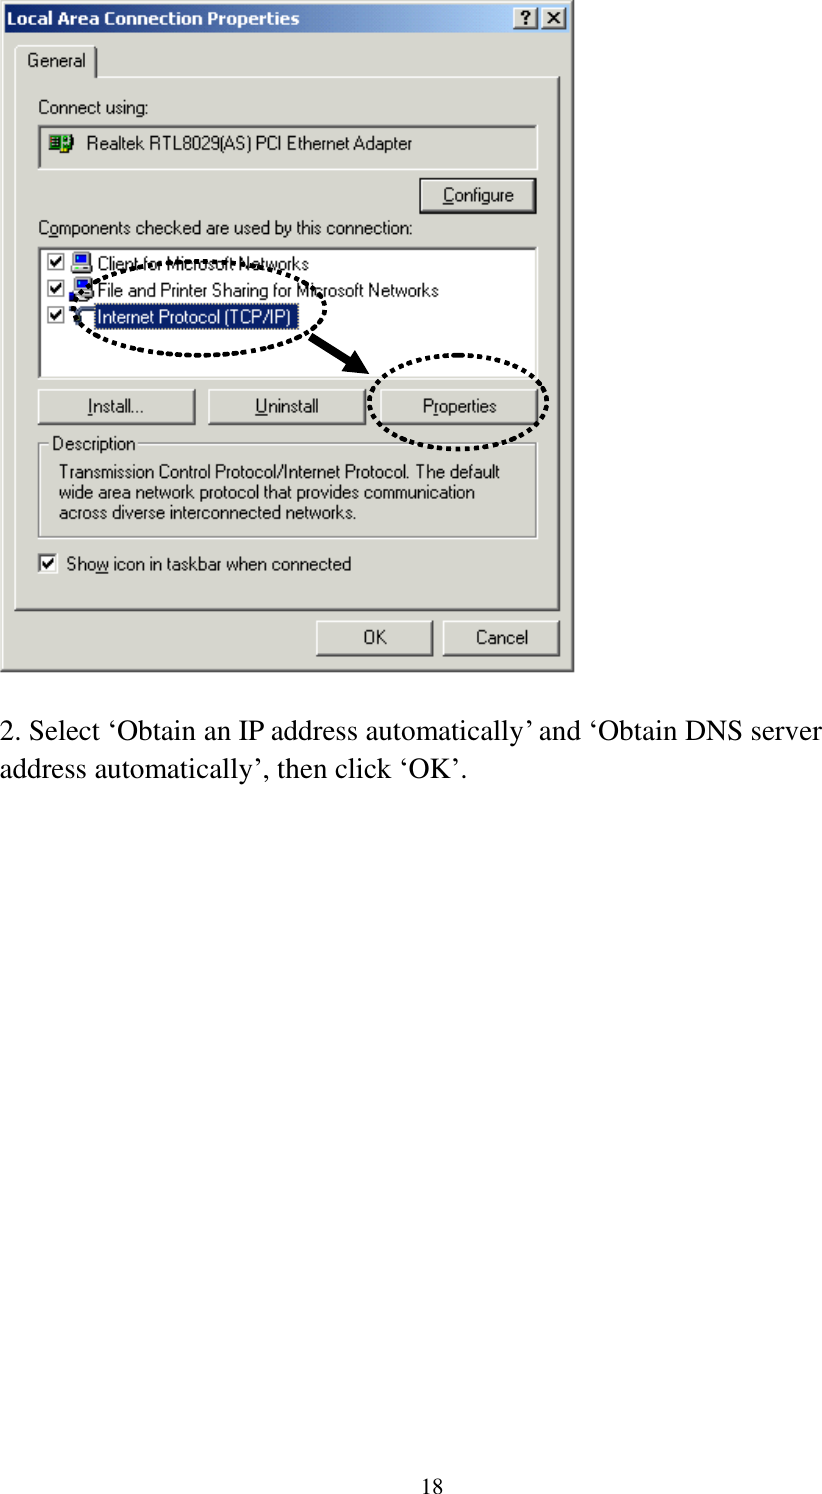 18   2. Select „Obtain an IP address automatically‟ and „Obtain DNS server address automatically‟, then click „OK‟.  